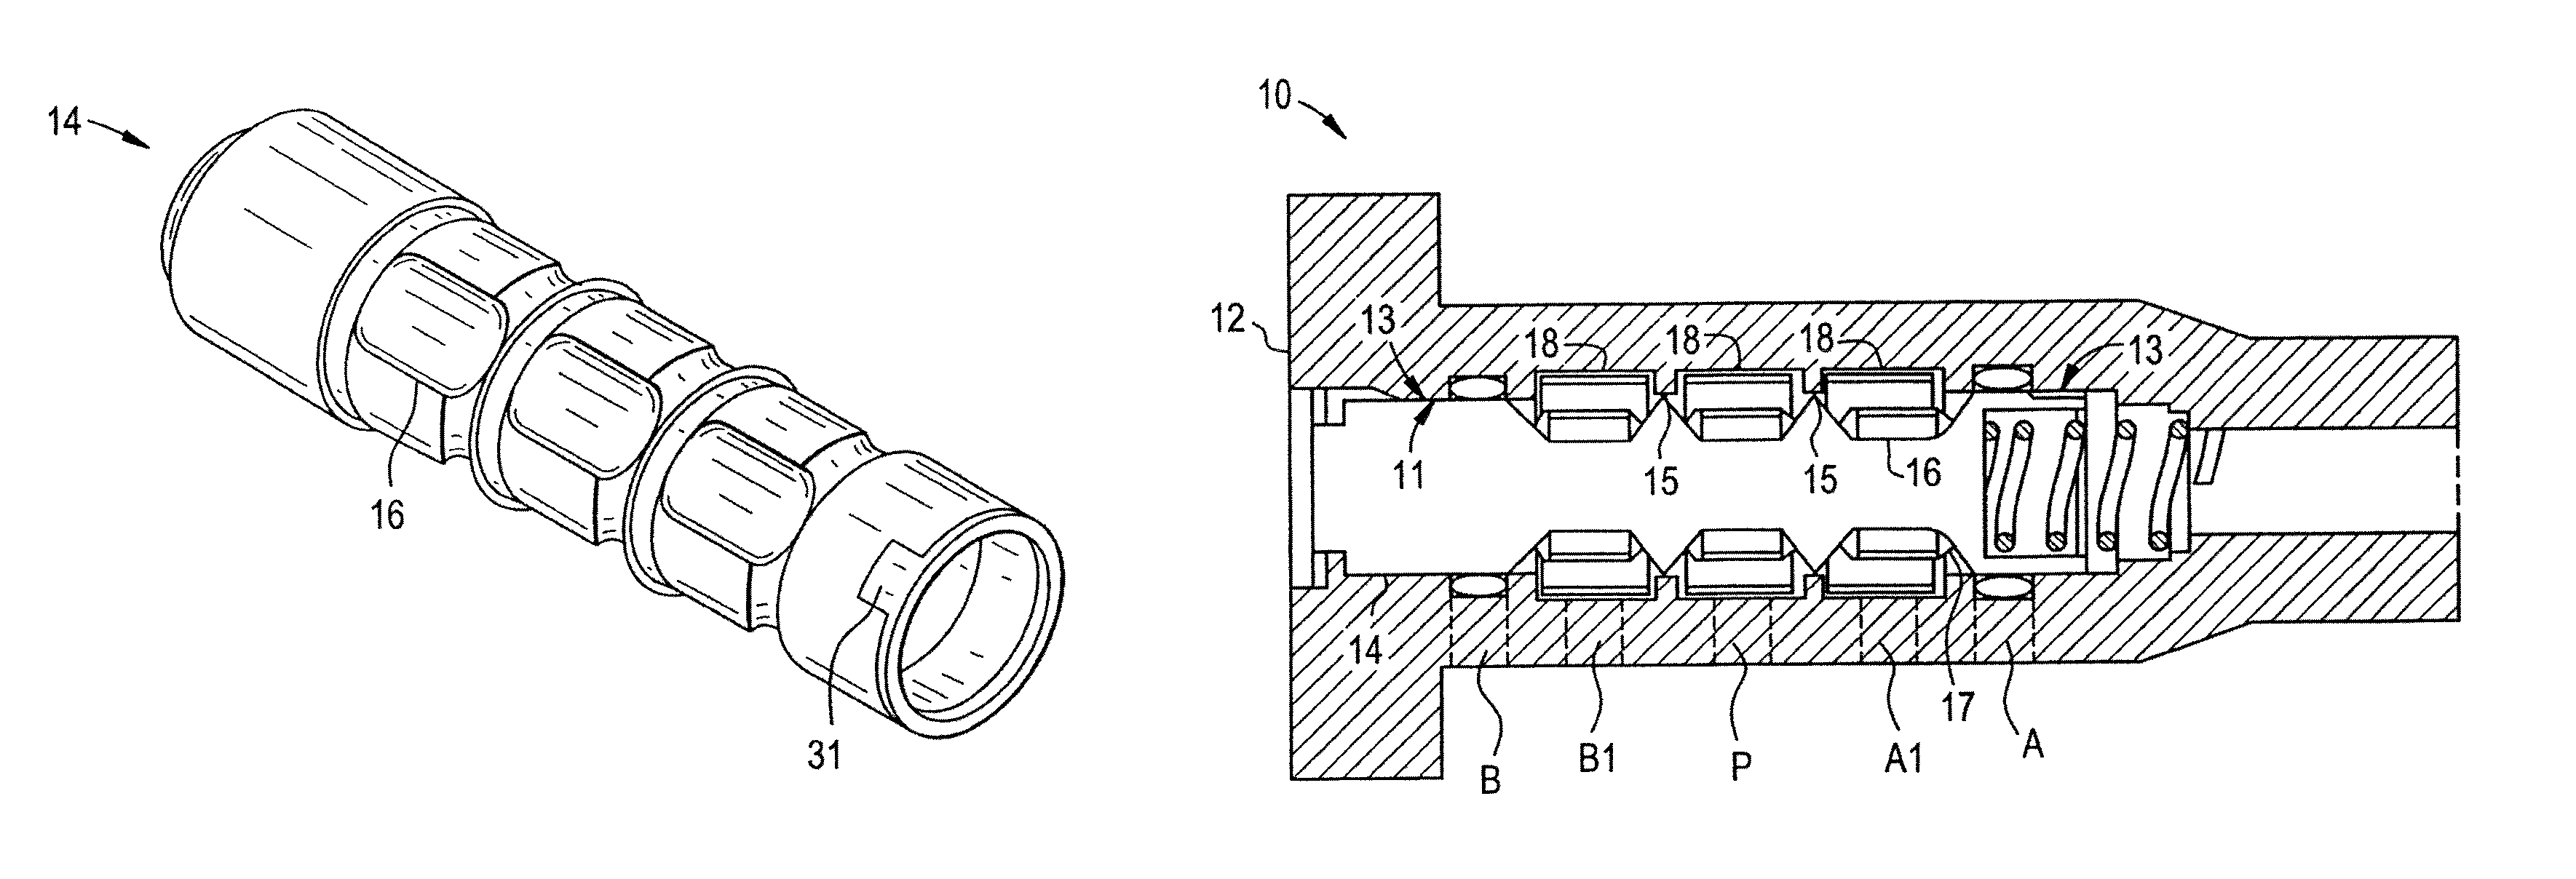 Hydraulic valve for an internal combustion engine